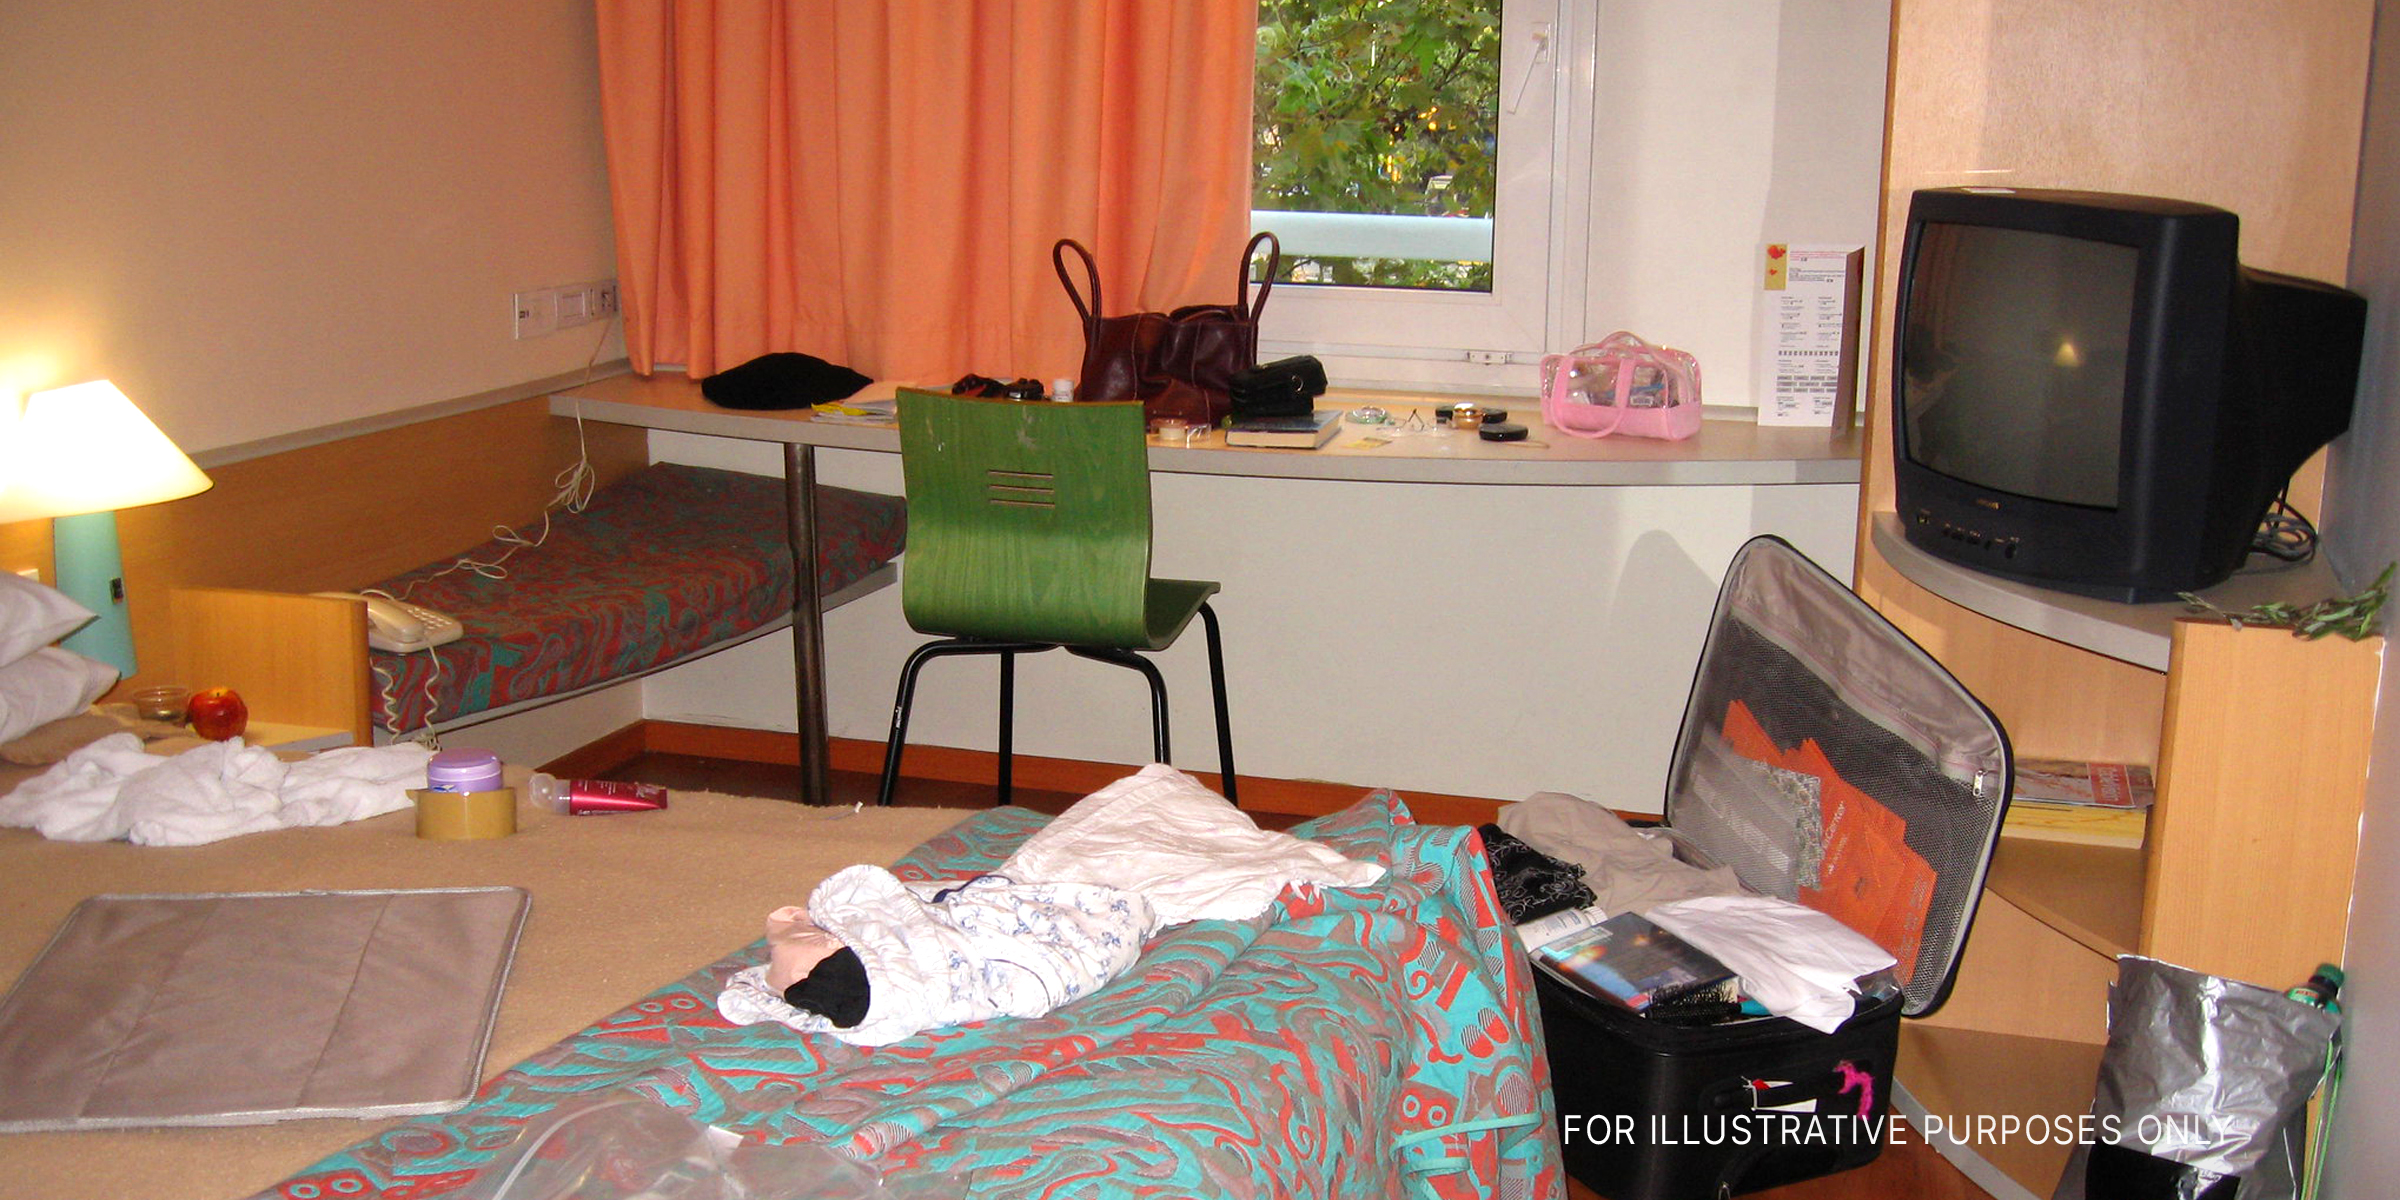 A messy hotel room | Source: Flickr